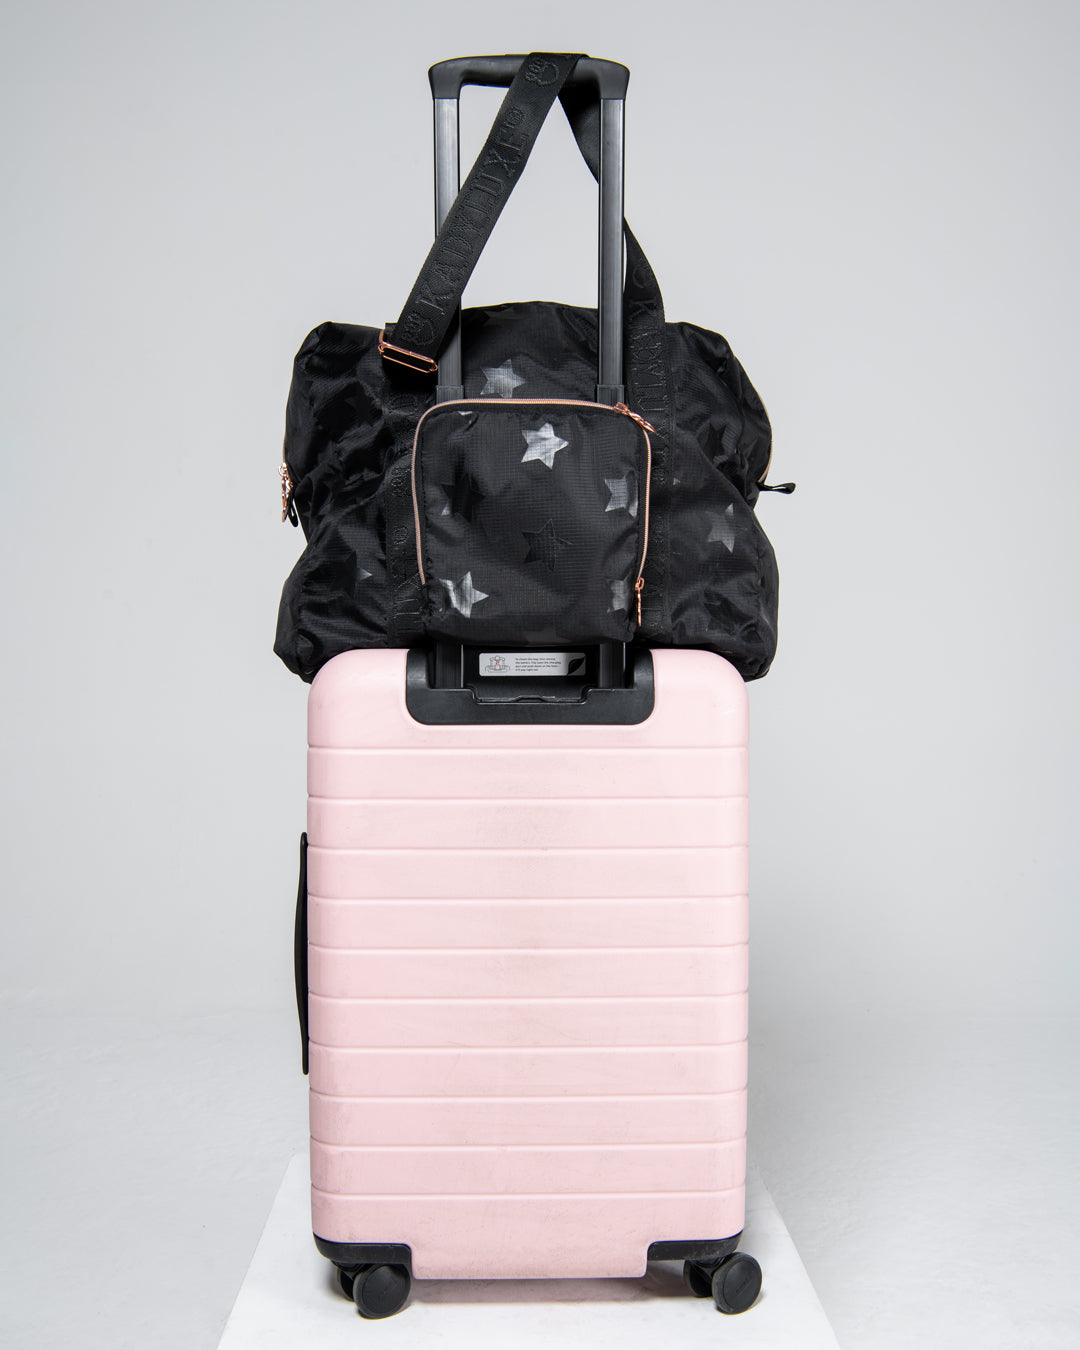 KADYLUXE® packable travel bag in black star print shown on luggage.